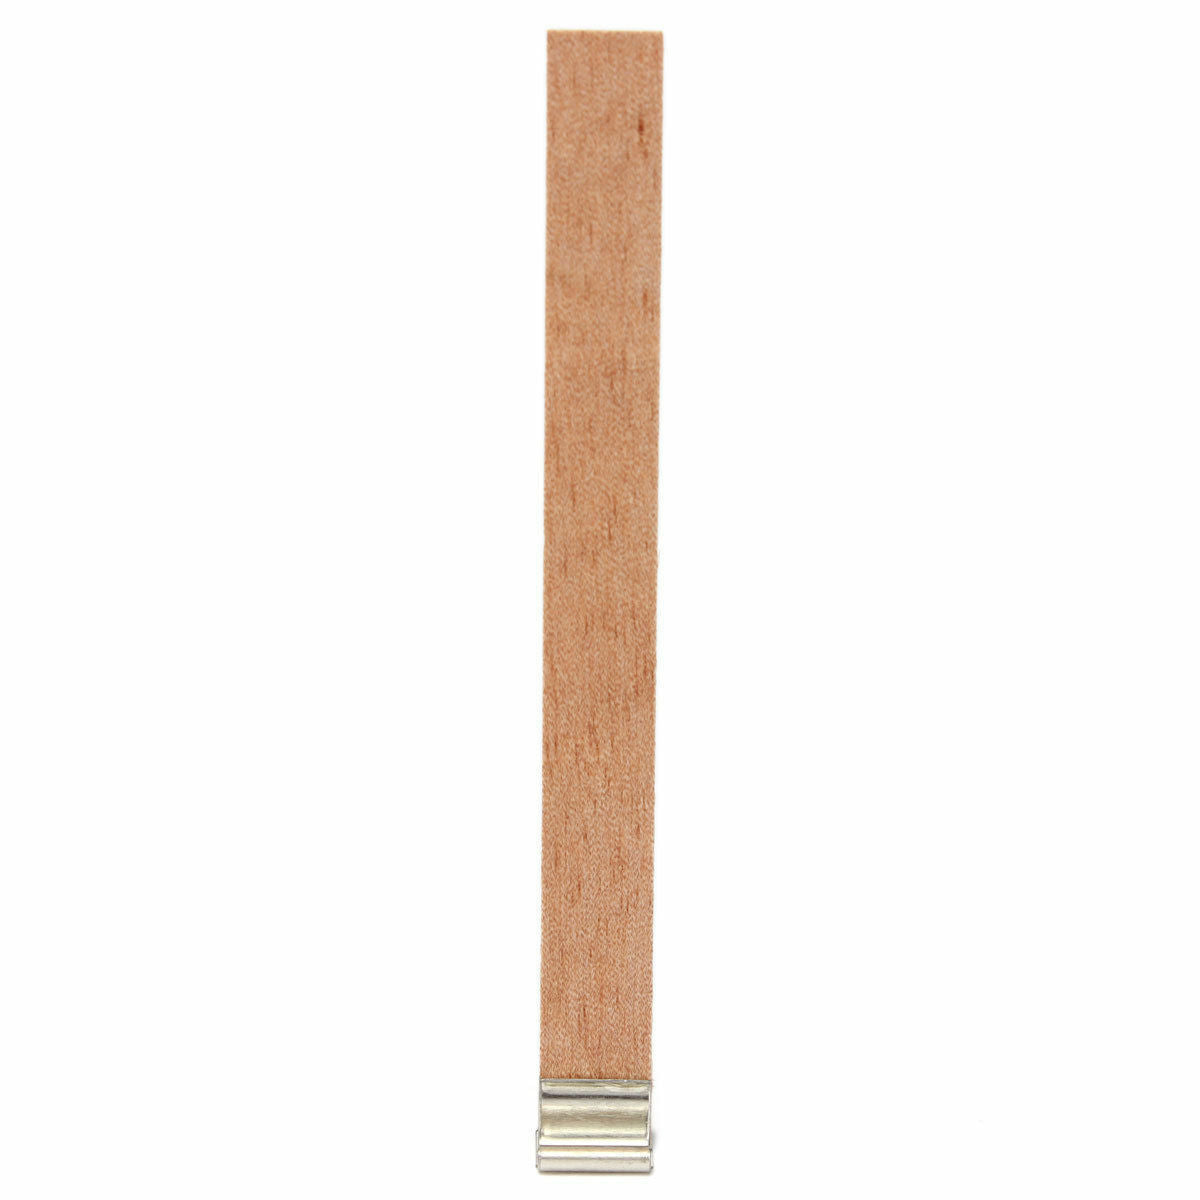 10pcs 13mm x 130mm Candle Wood Wick With Sustainer Tab Candle Making Supplies